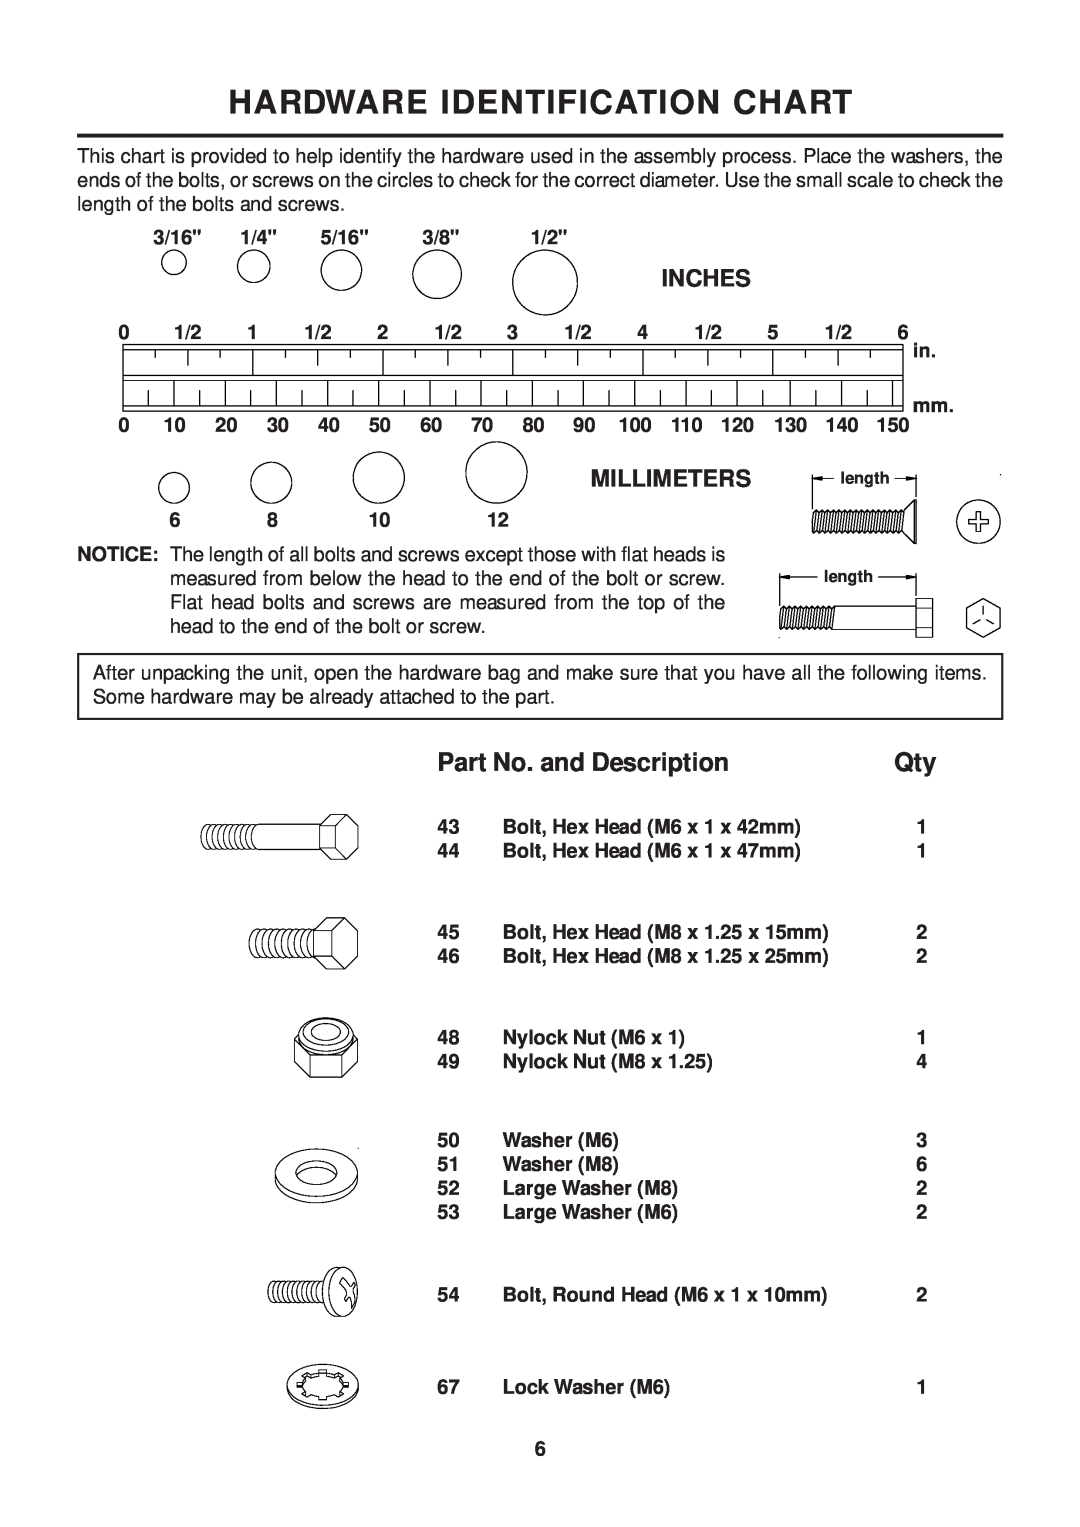 Stamina Products 55-1539A owner manual Hardware Identification Chart, Part No. and Description, Inches, Millimeters 